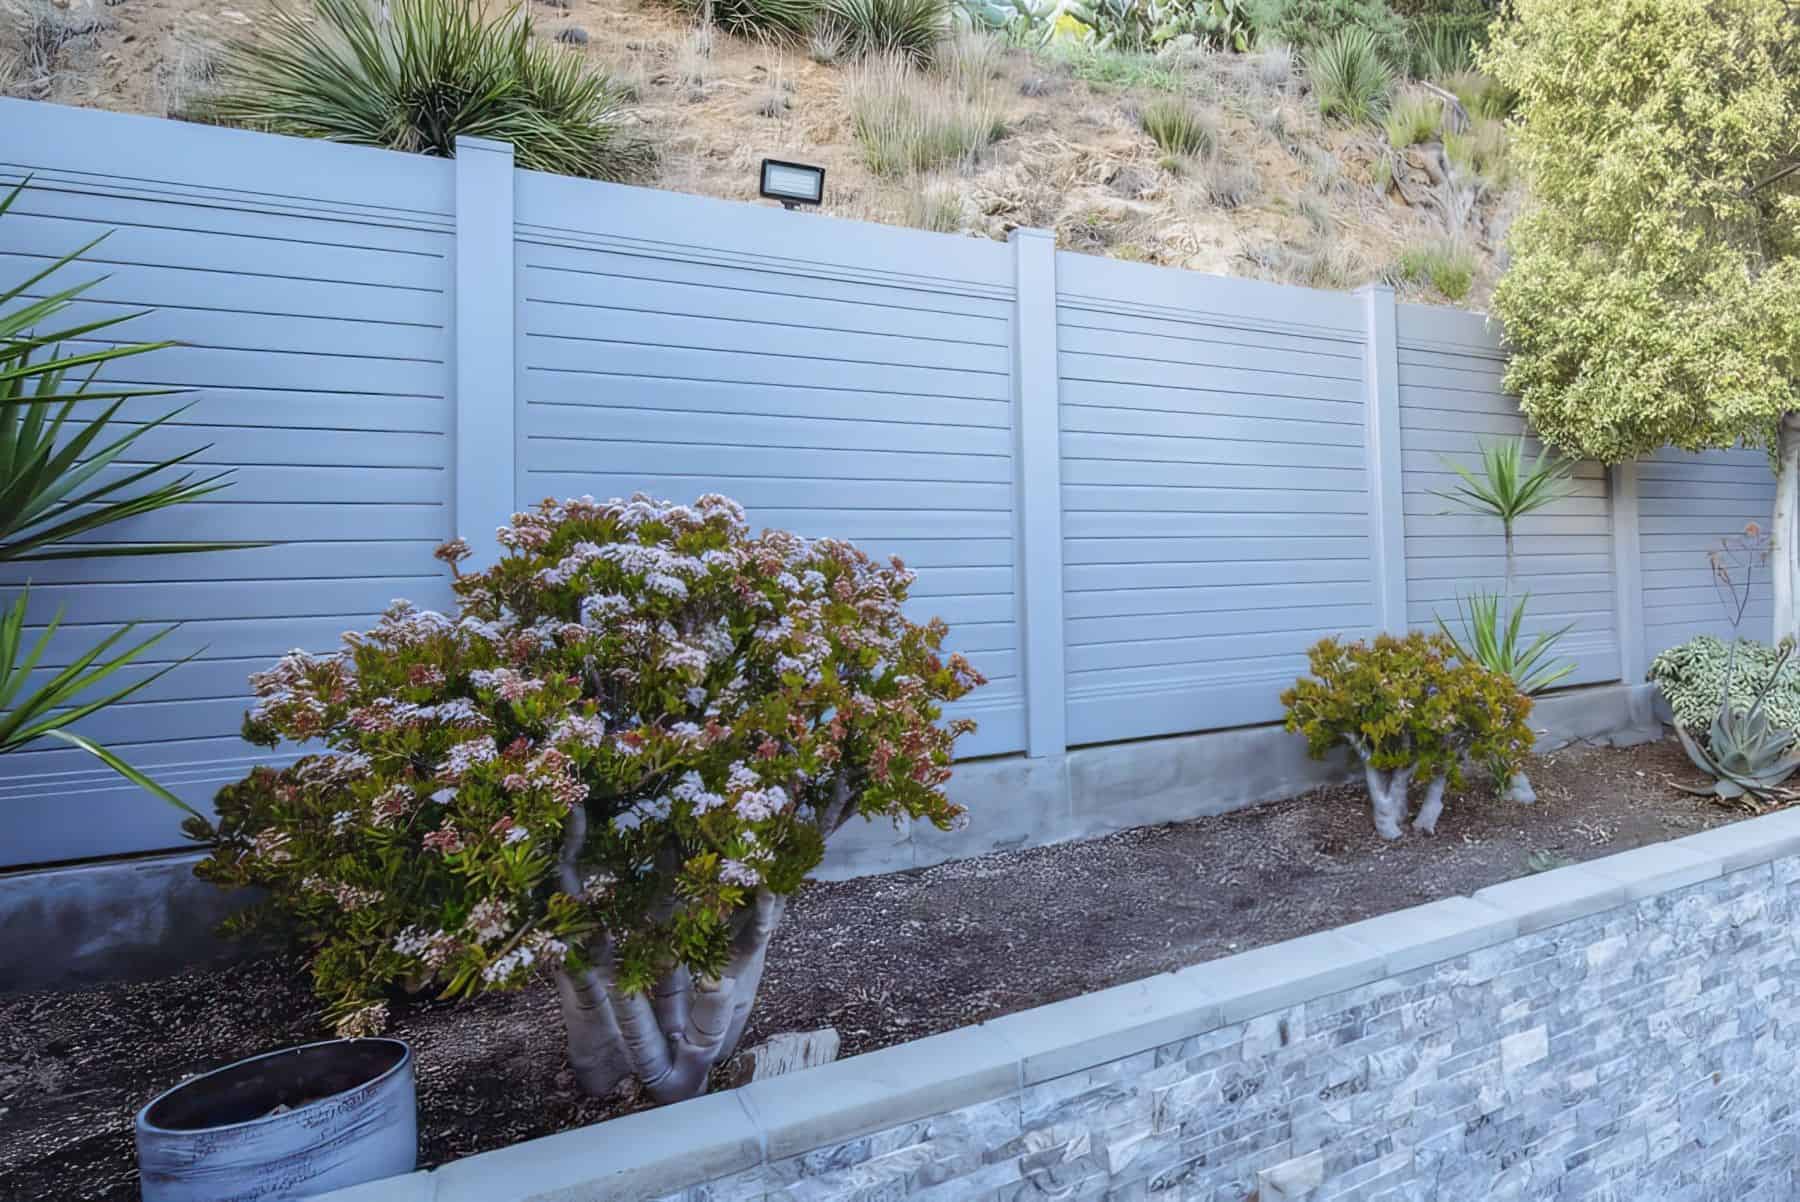 Vinyl privacy horizontal fence in front of short hill and behind small backyard garden with miniature trees and small plants